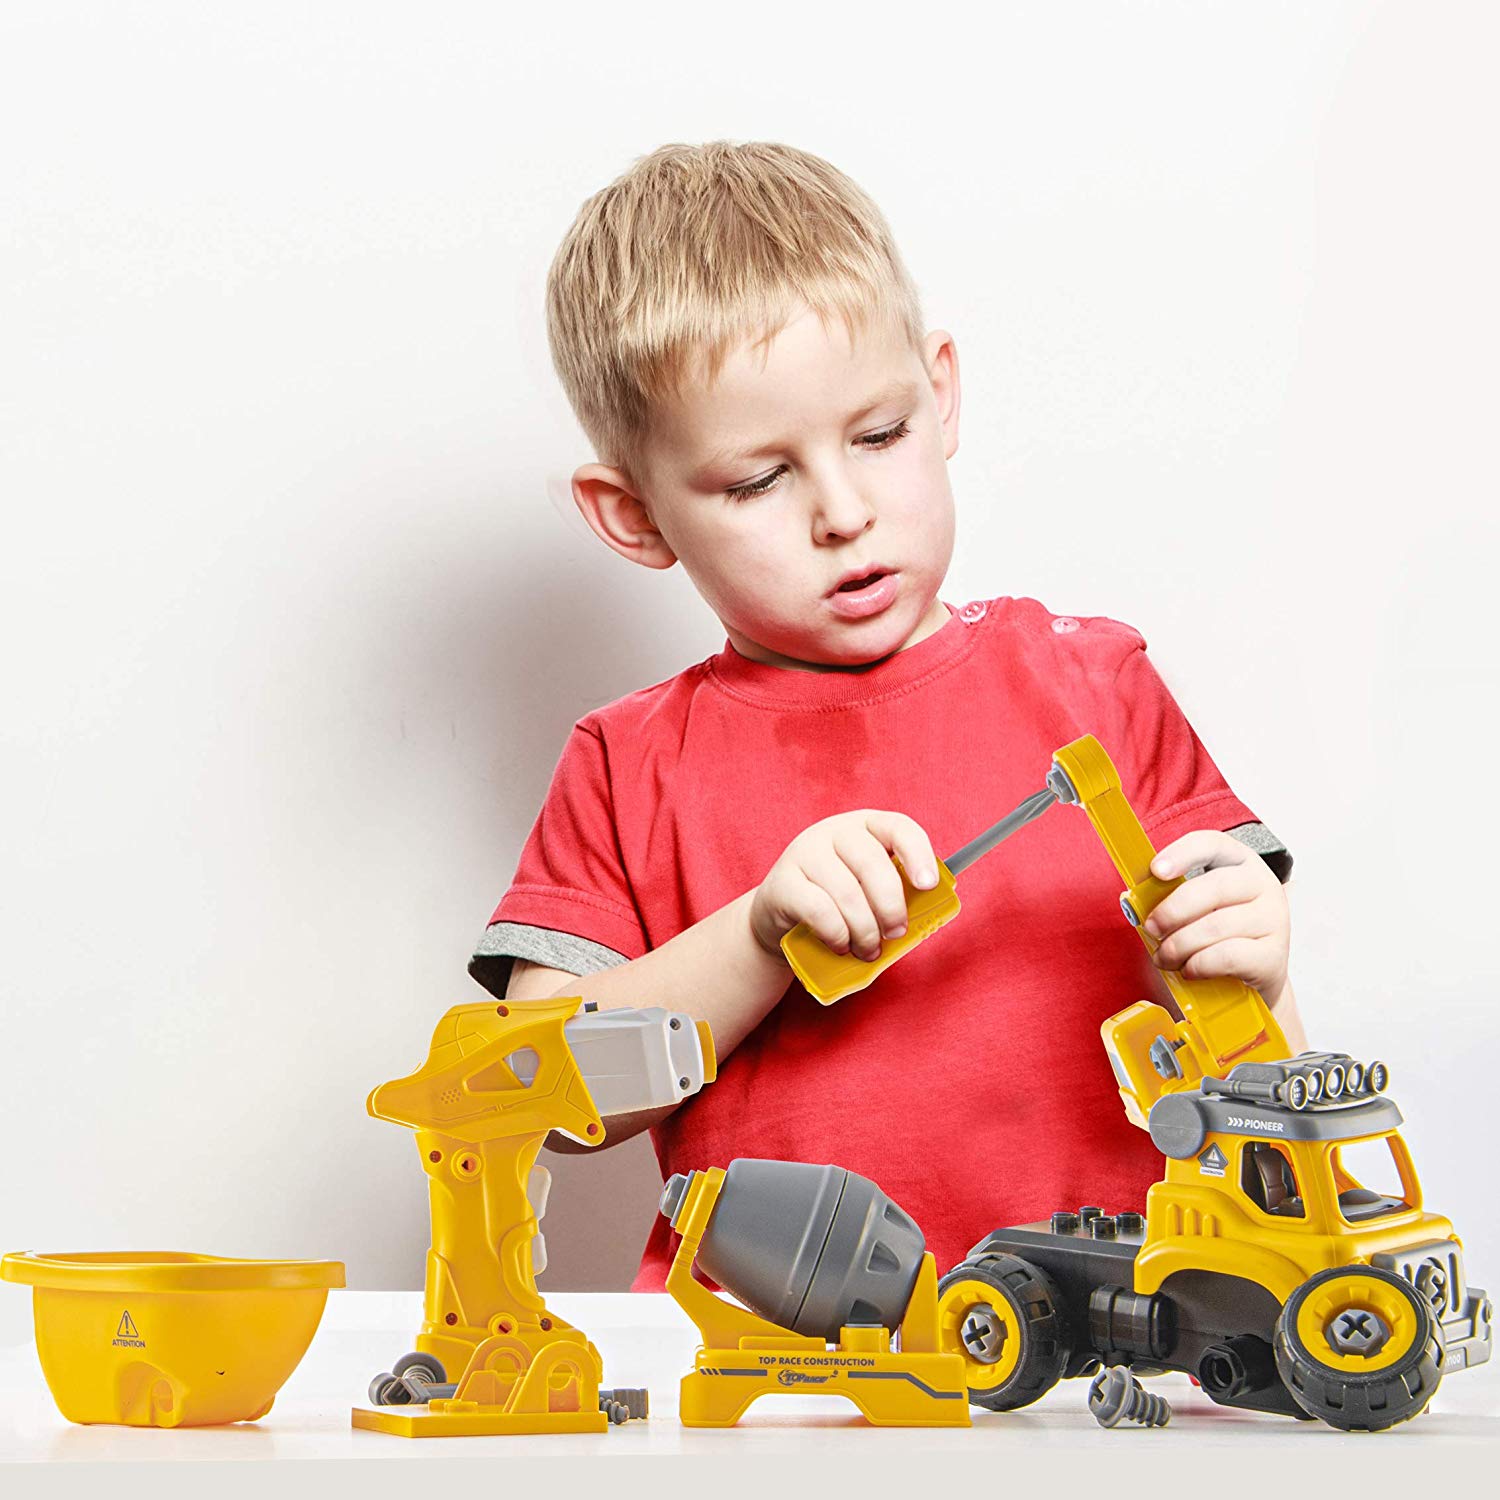 KidPal Take Apart Car STEM Toy Building Set for 3 4 5 Year Old Boy & Girl with Electric Toy Drill and Remote Control Construction Vehicle Kids Toy Crane Car Build Your Own Car Toddler Toys Age 3 4 5 